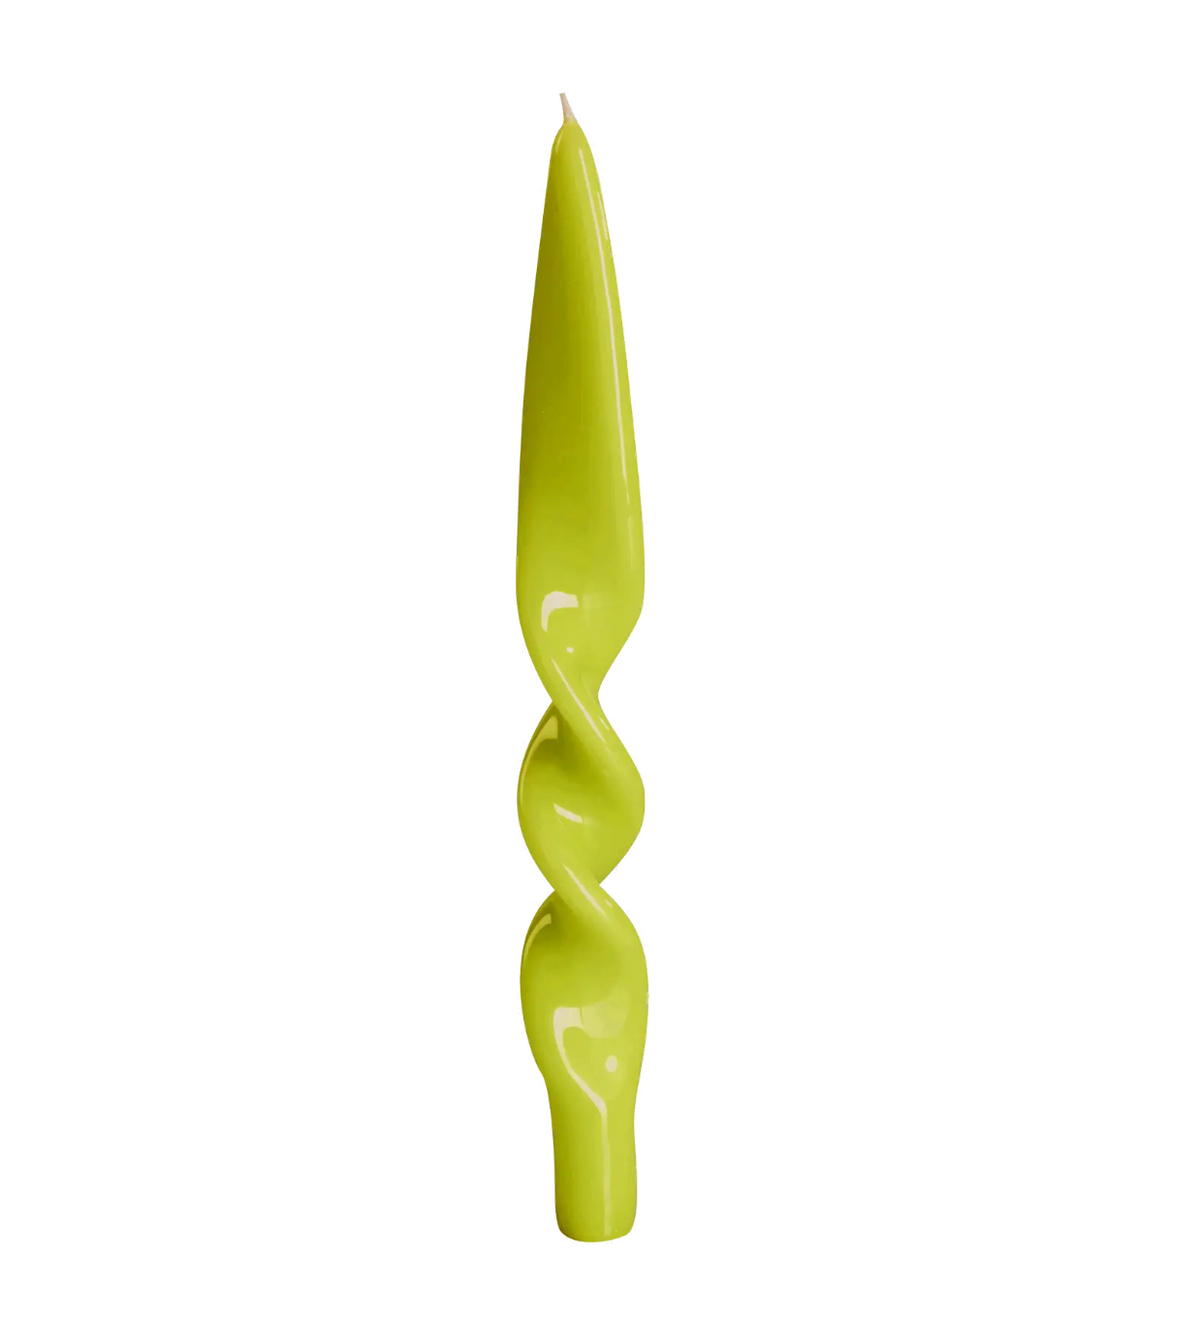 TWISTED CANDLE / LIME GREEN